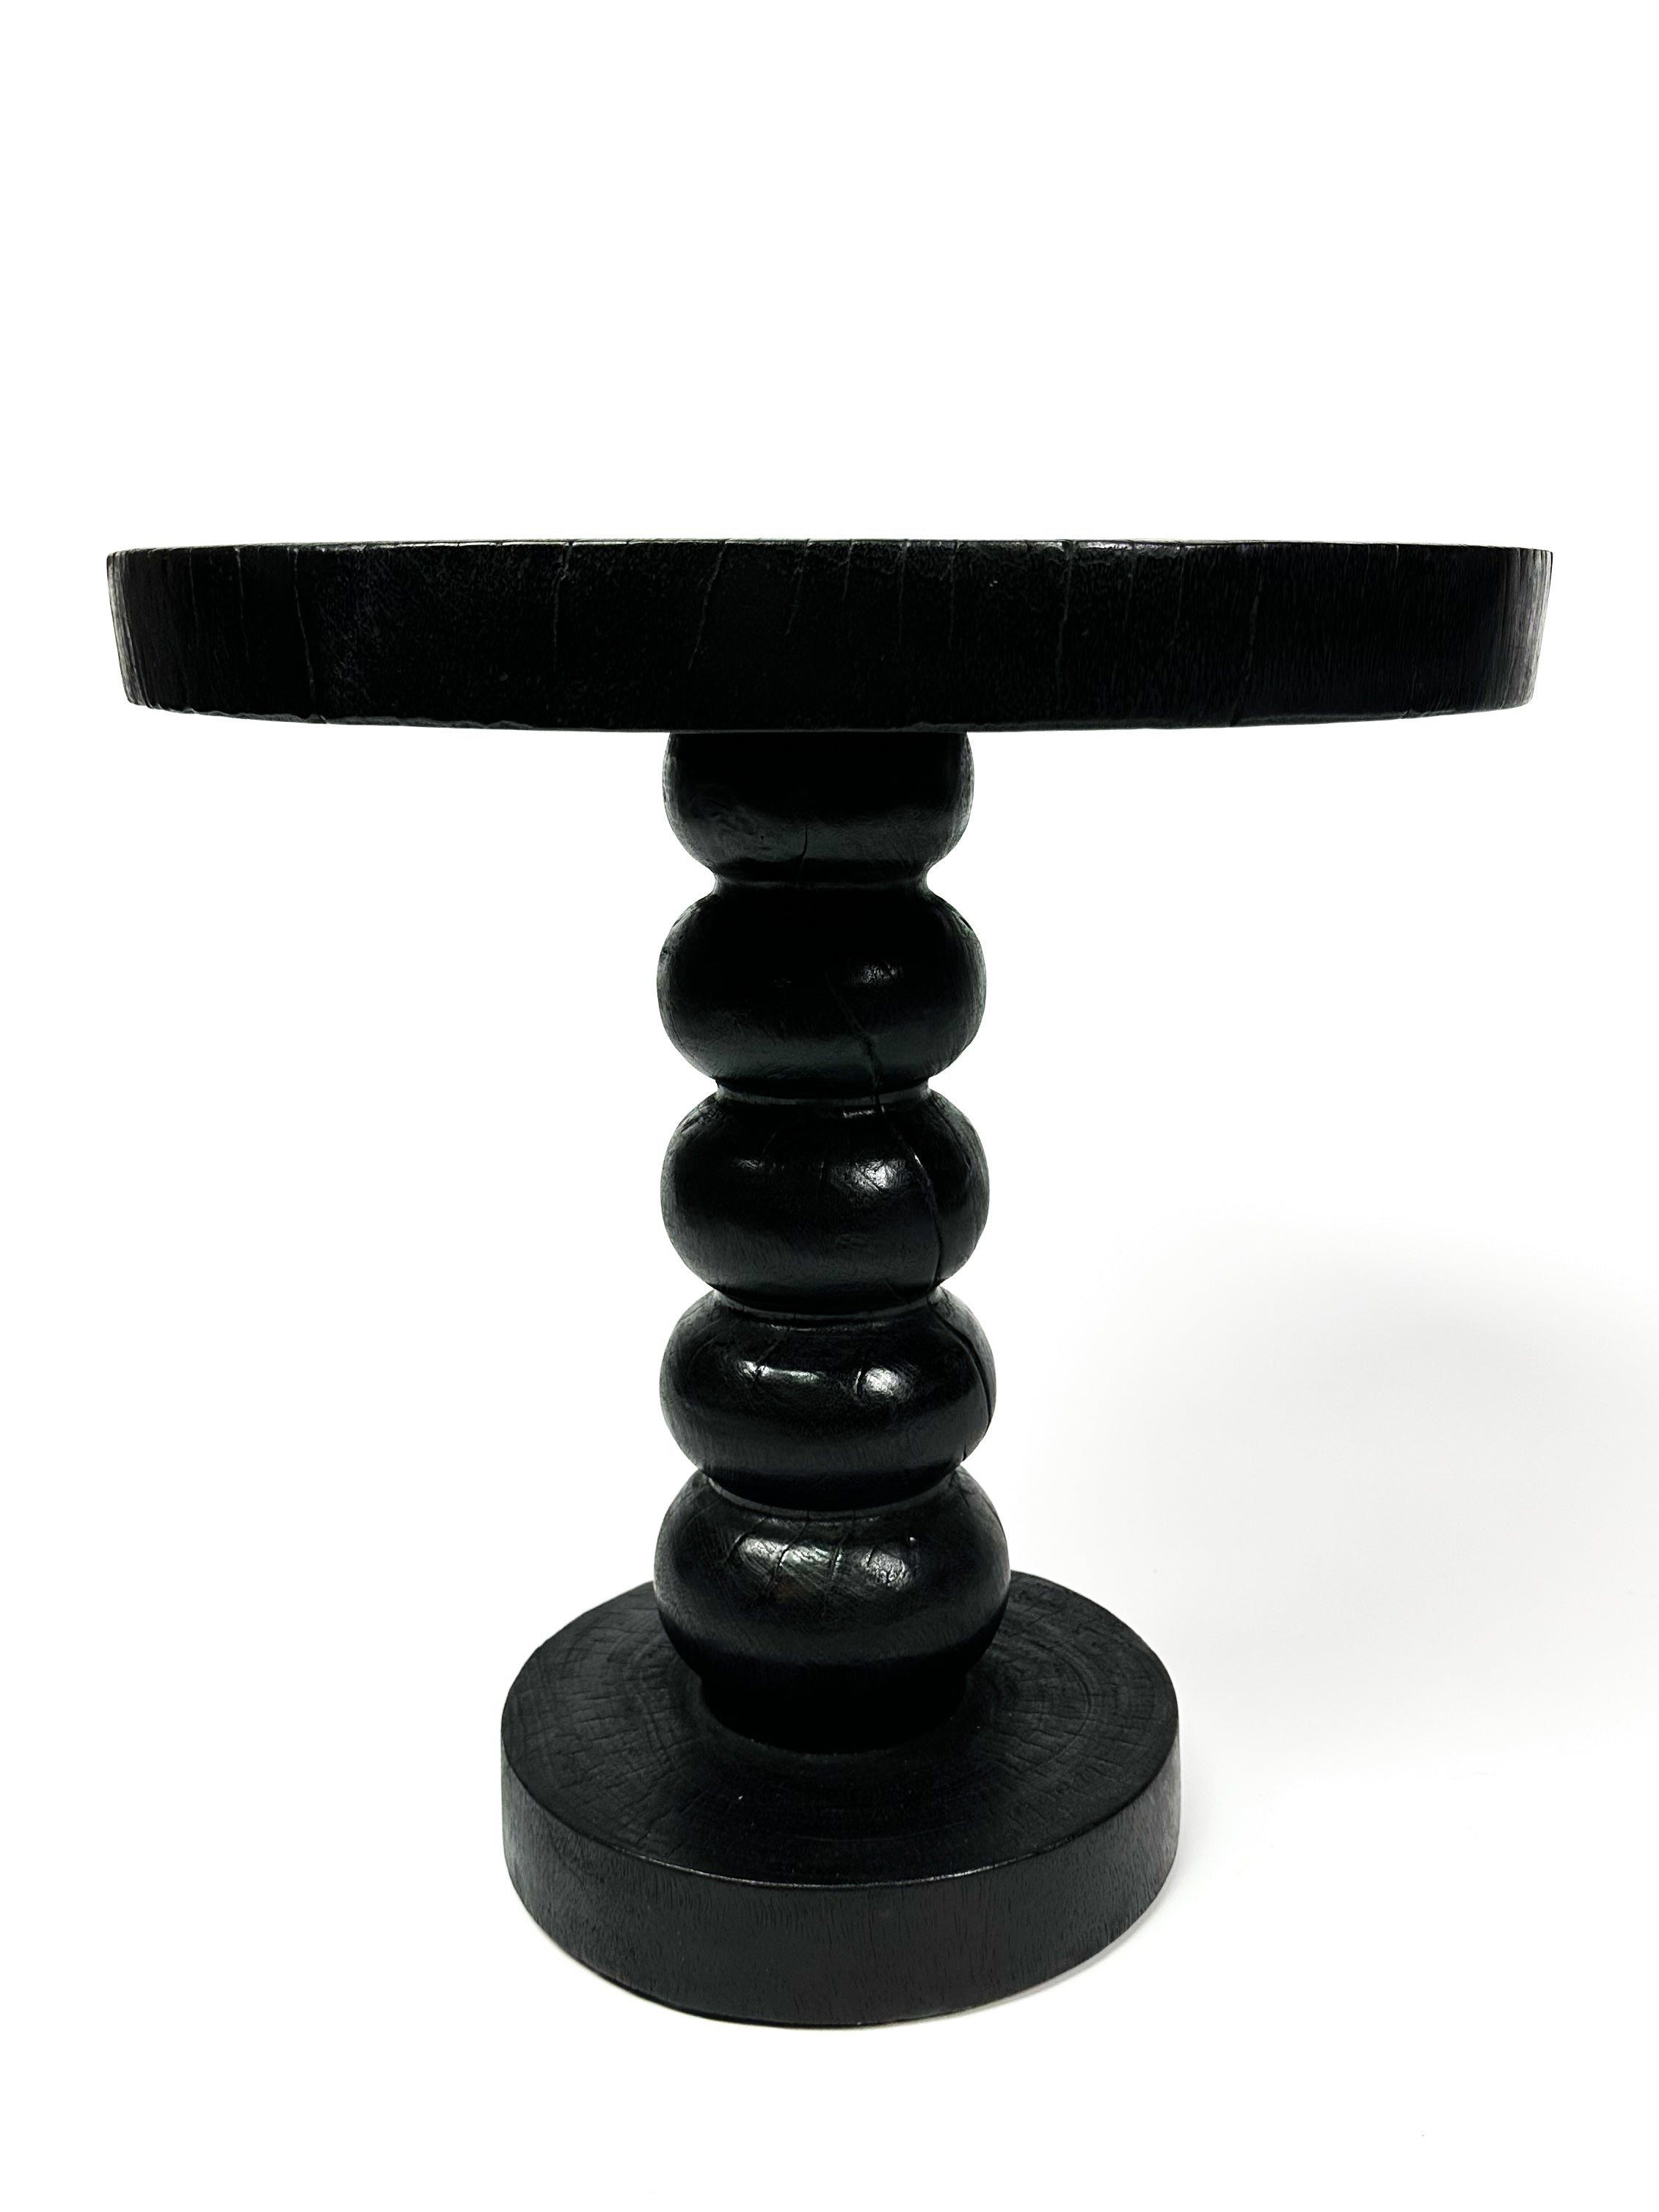 The black twisted round table